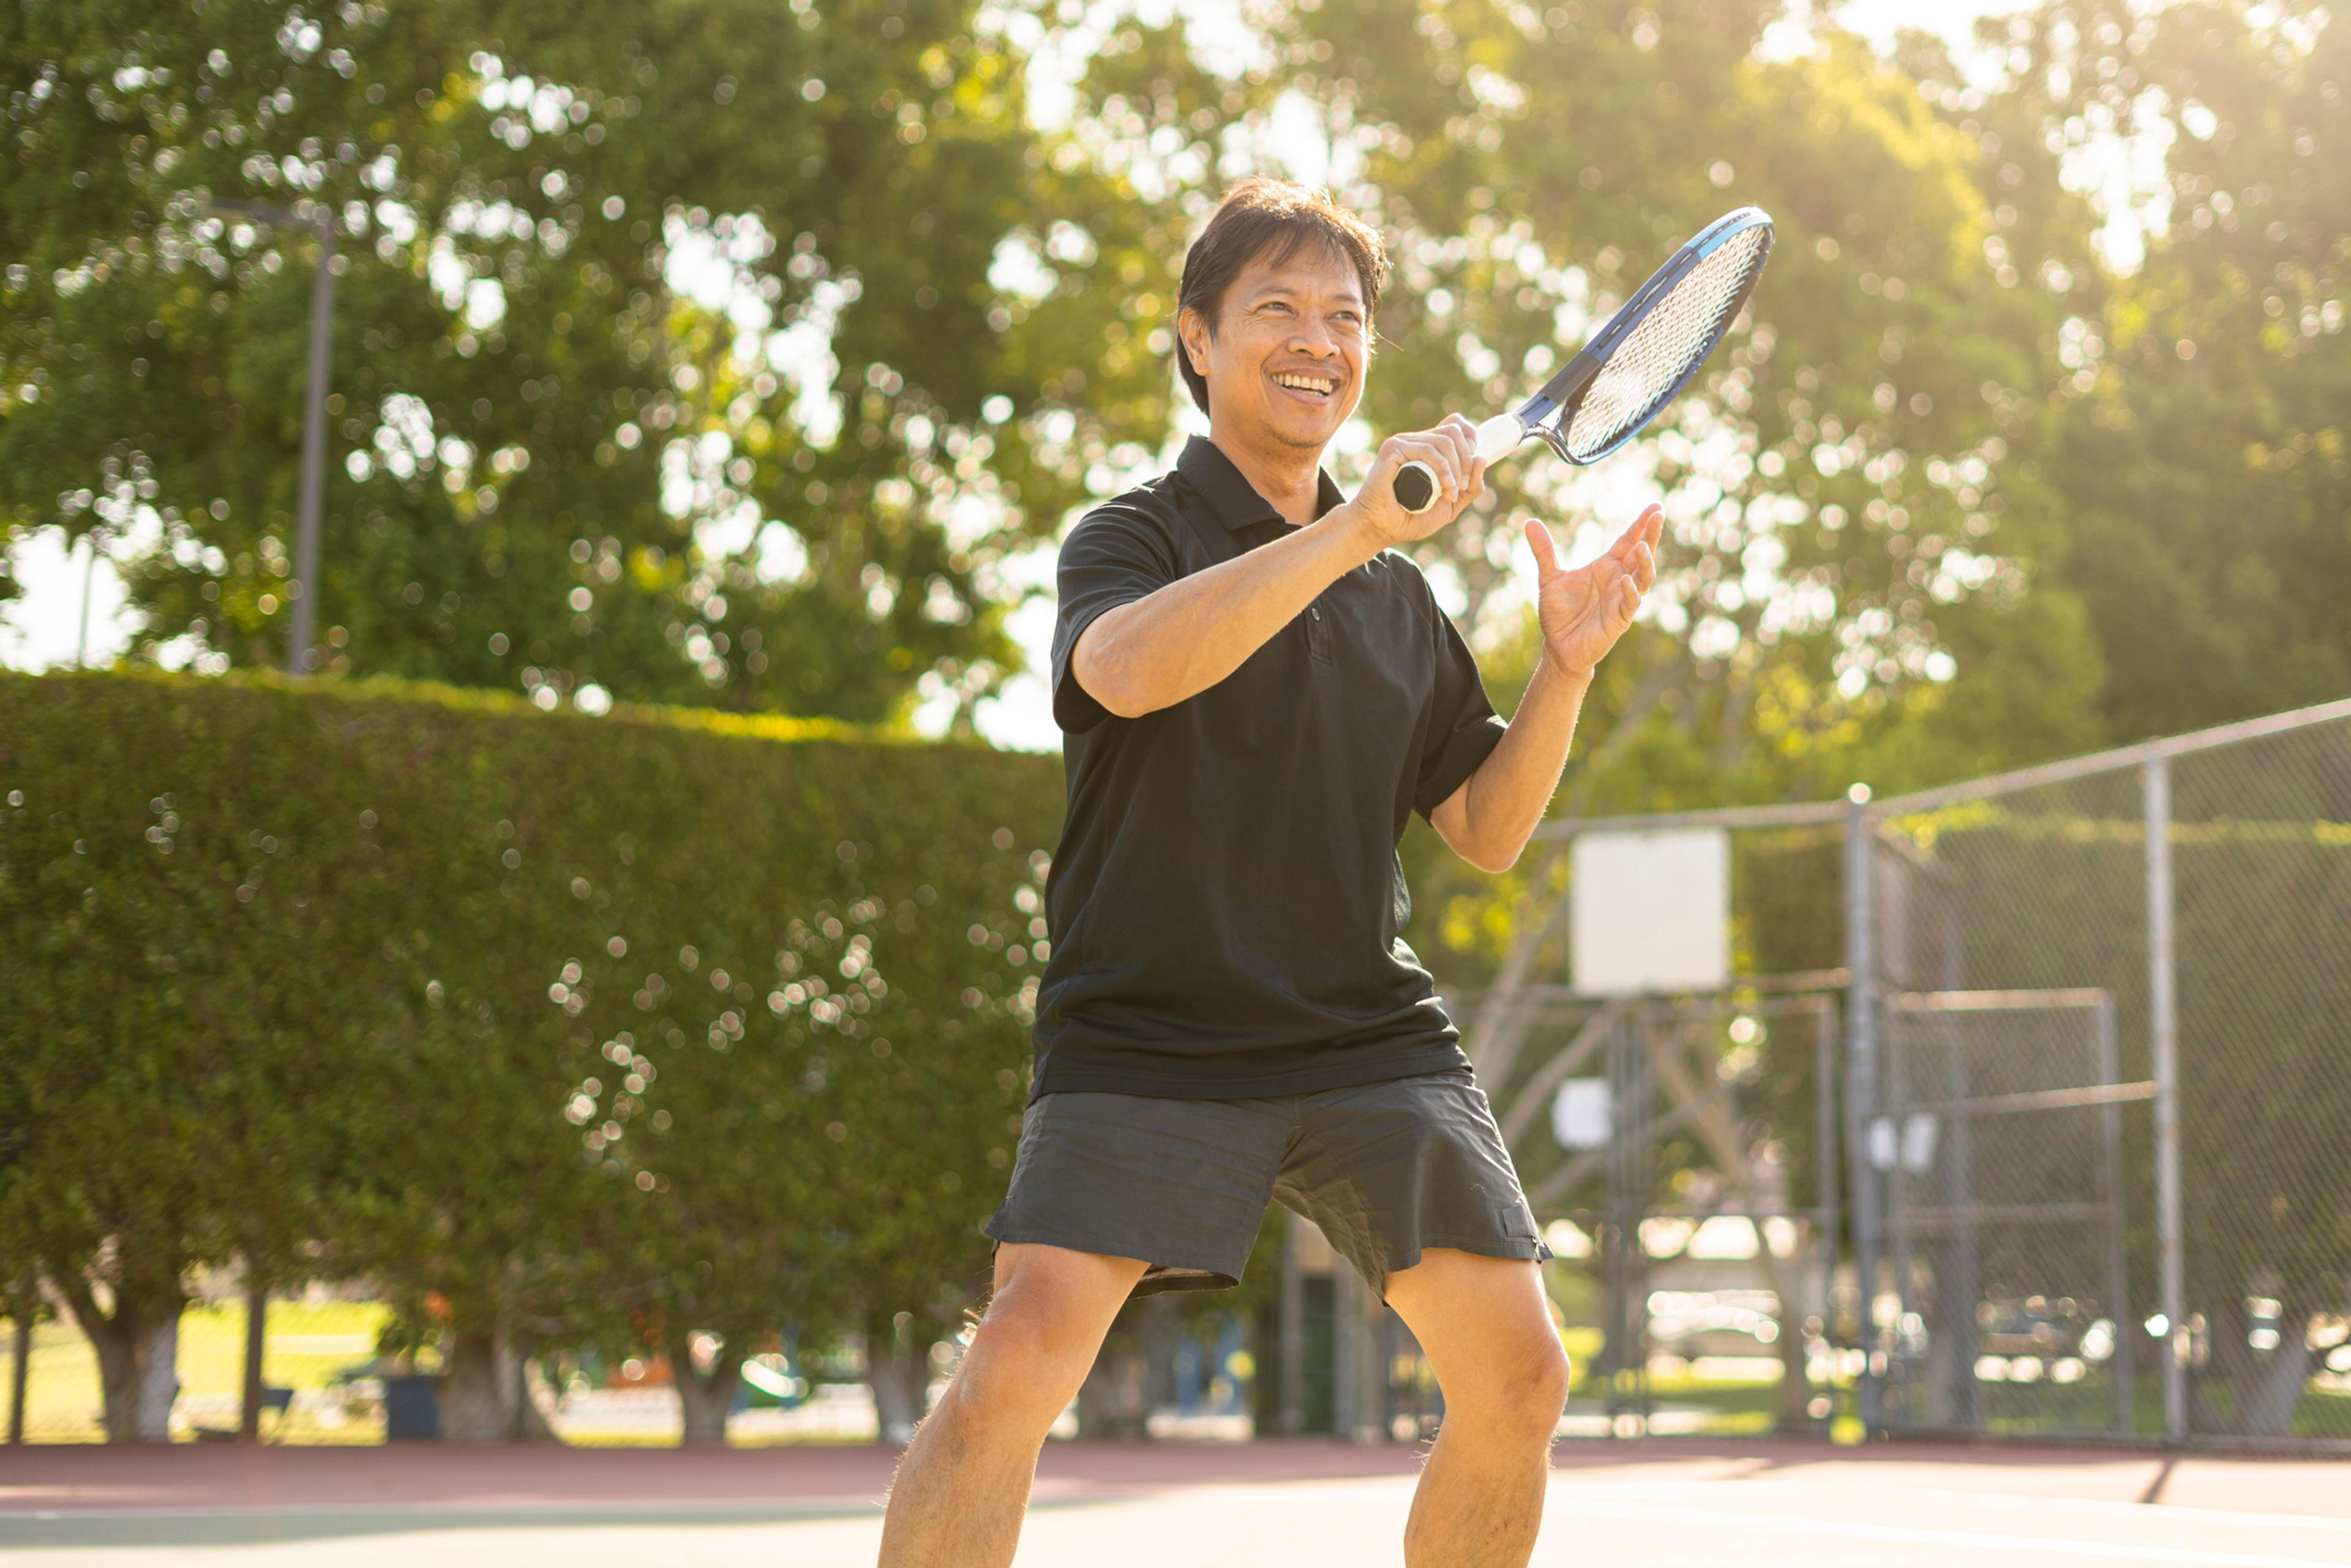 Man plays tennis staying healthy at every age